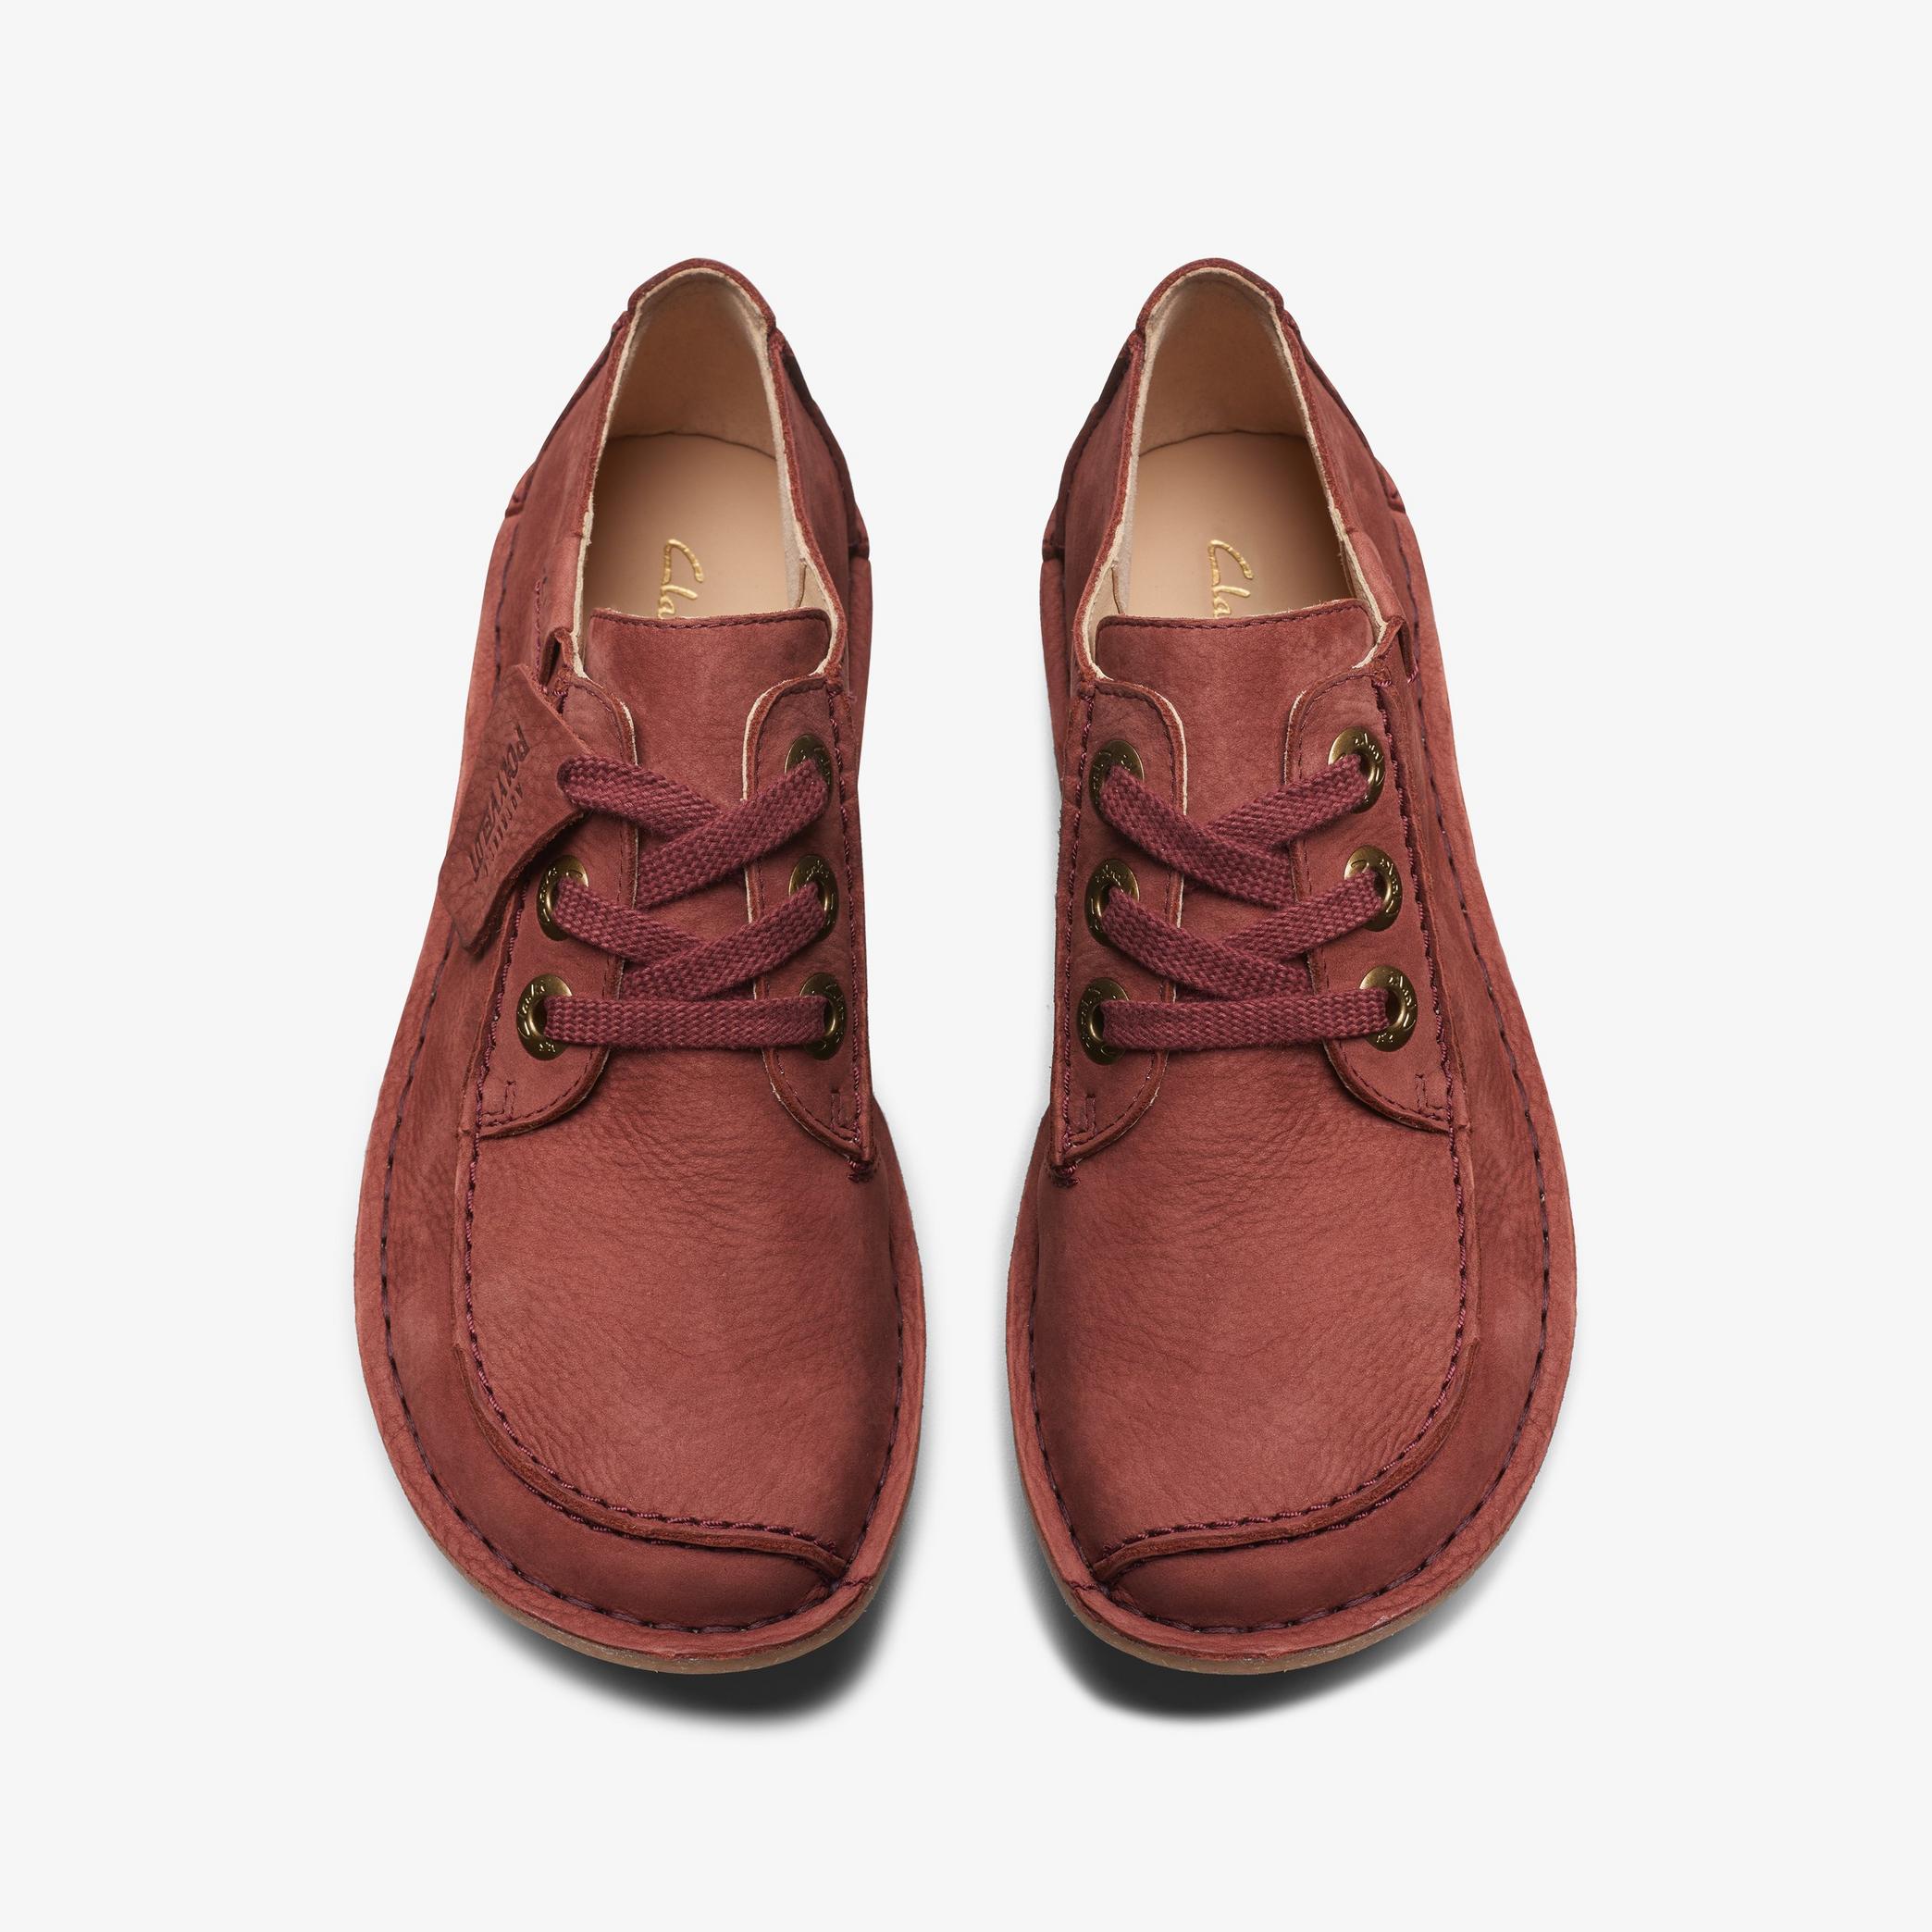 Funny Dream Chestnut Nubuck Derby Shoes, view 6 of 6